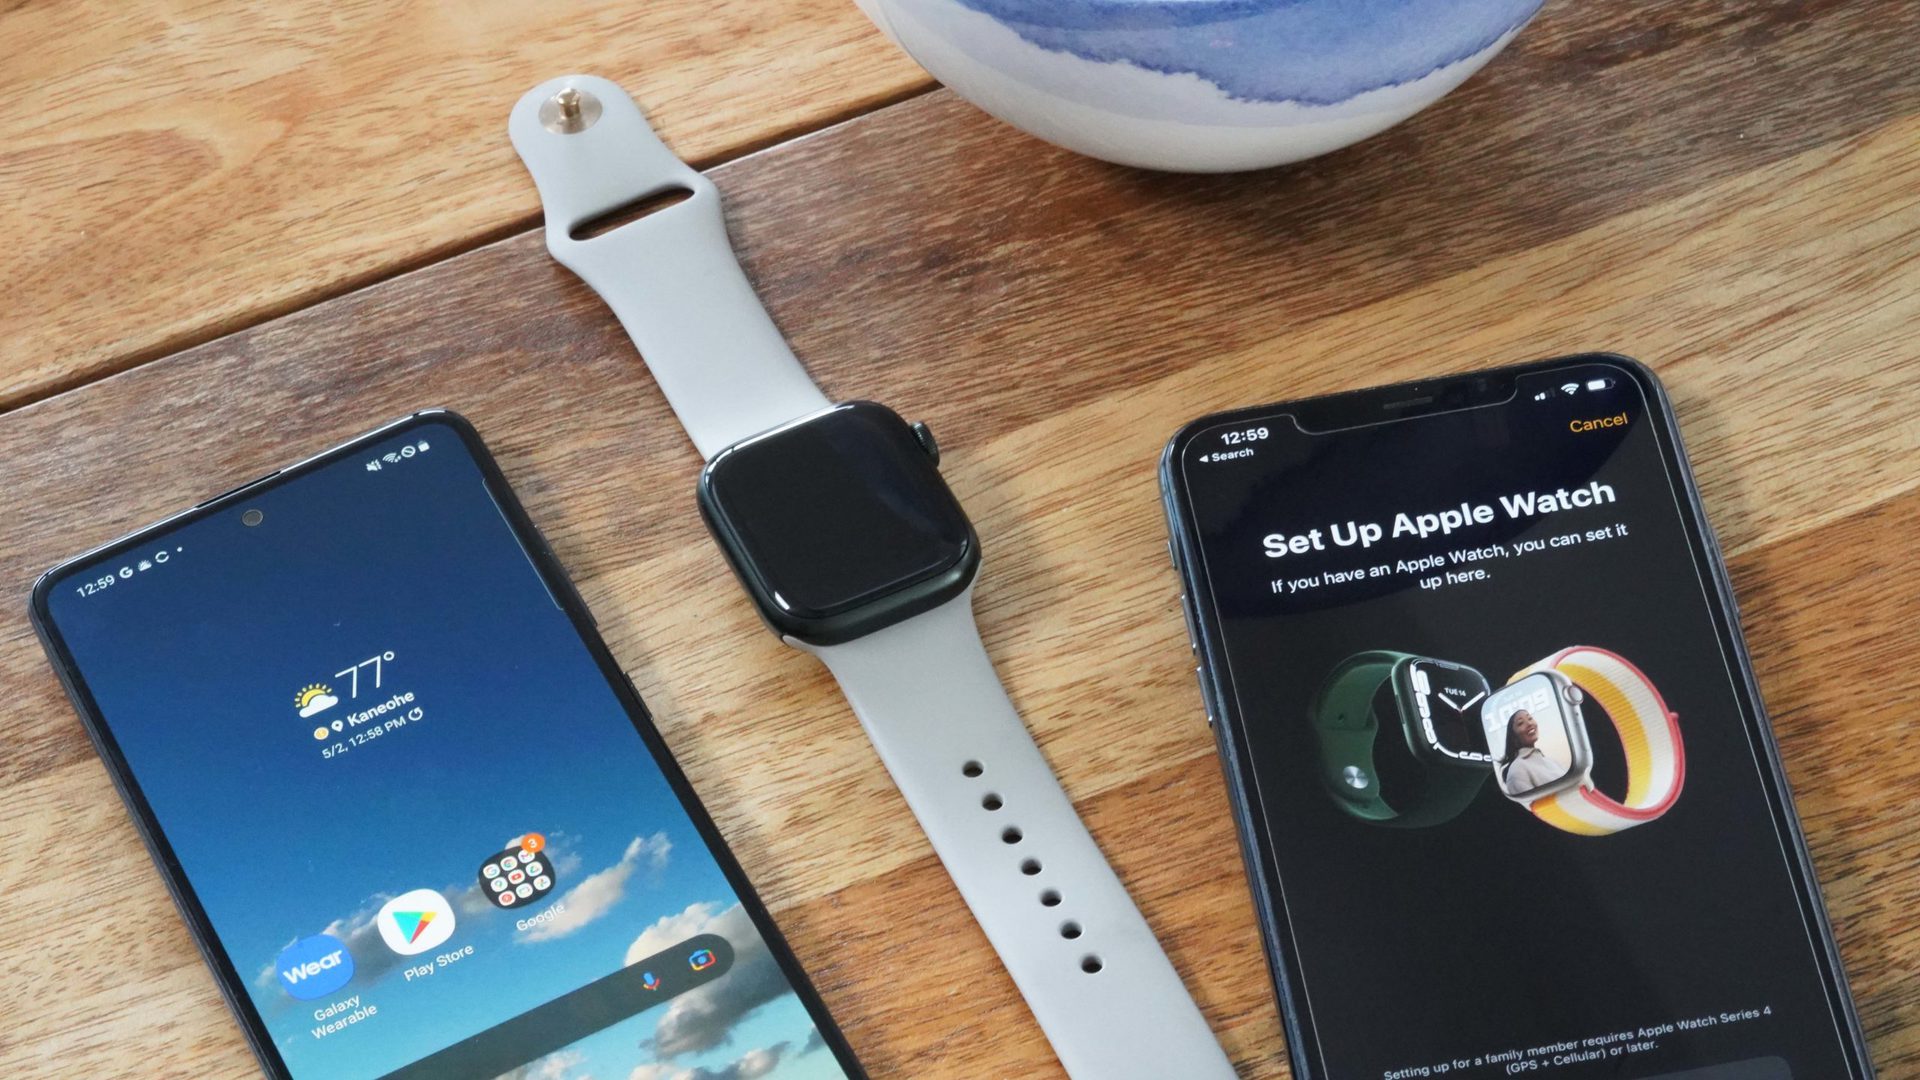 How To Use Apple Watch With An Android Smartphone